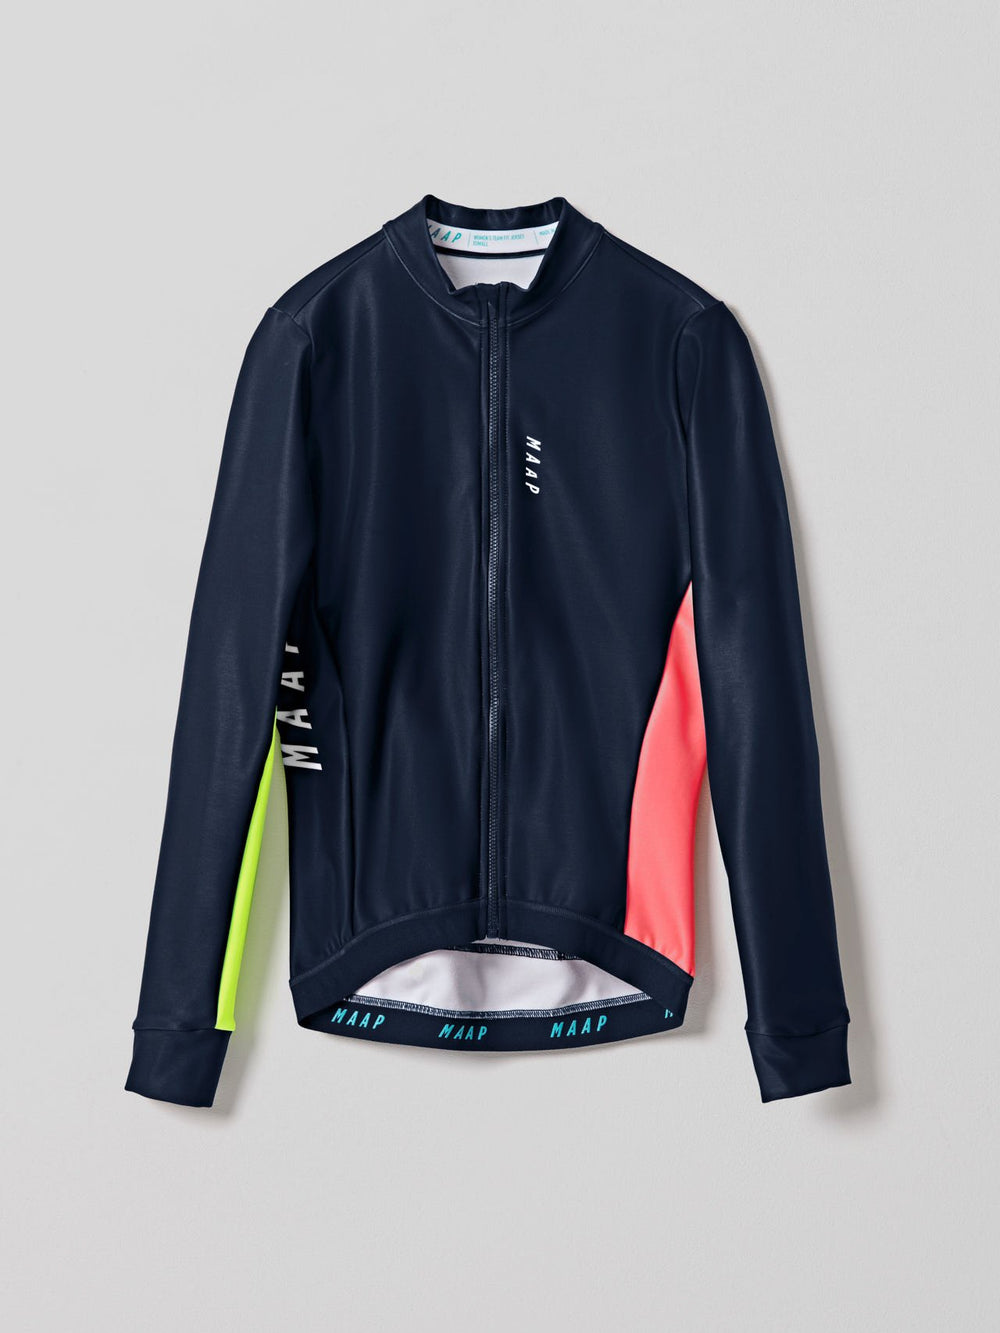 Product Image for Women's Vista Team LS Jersey